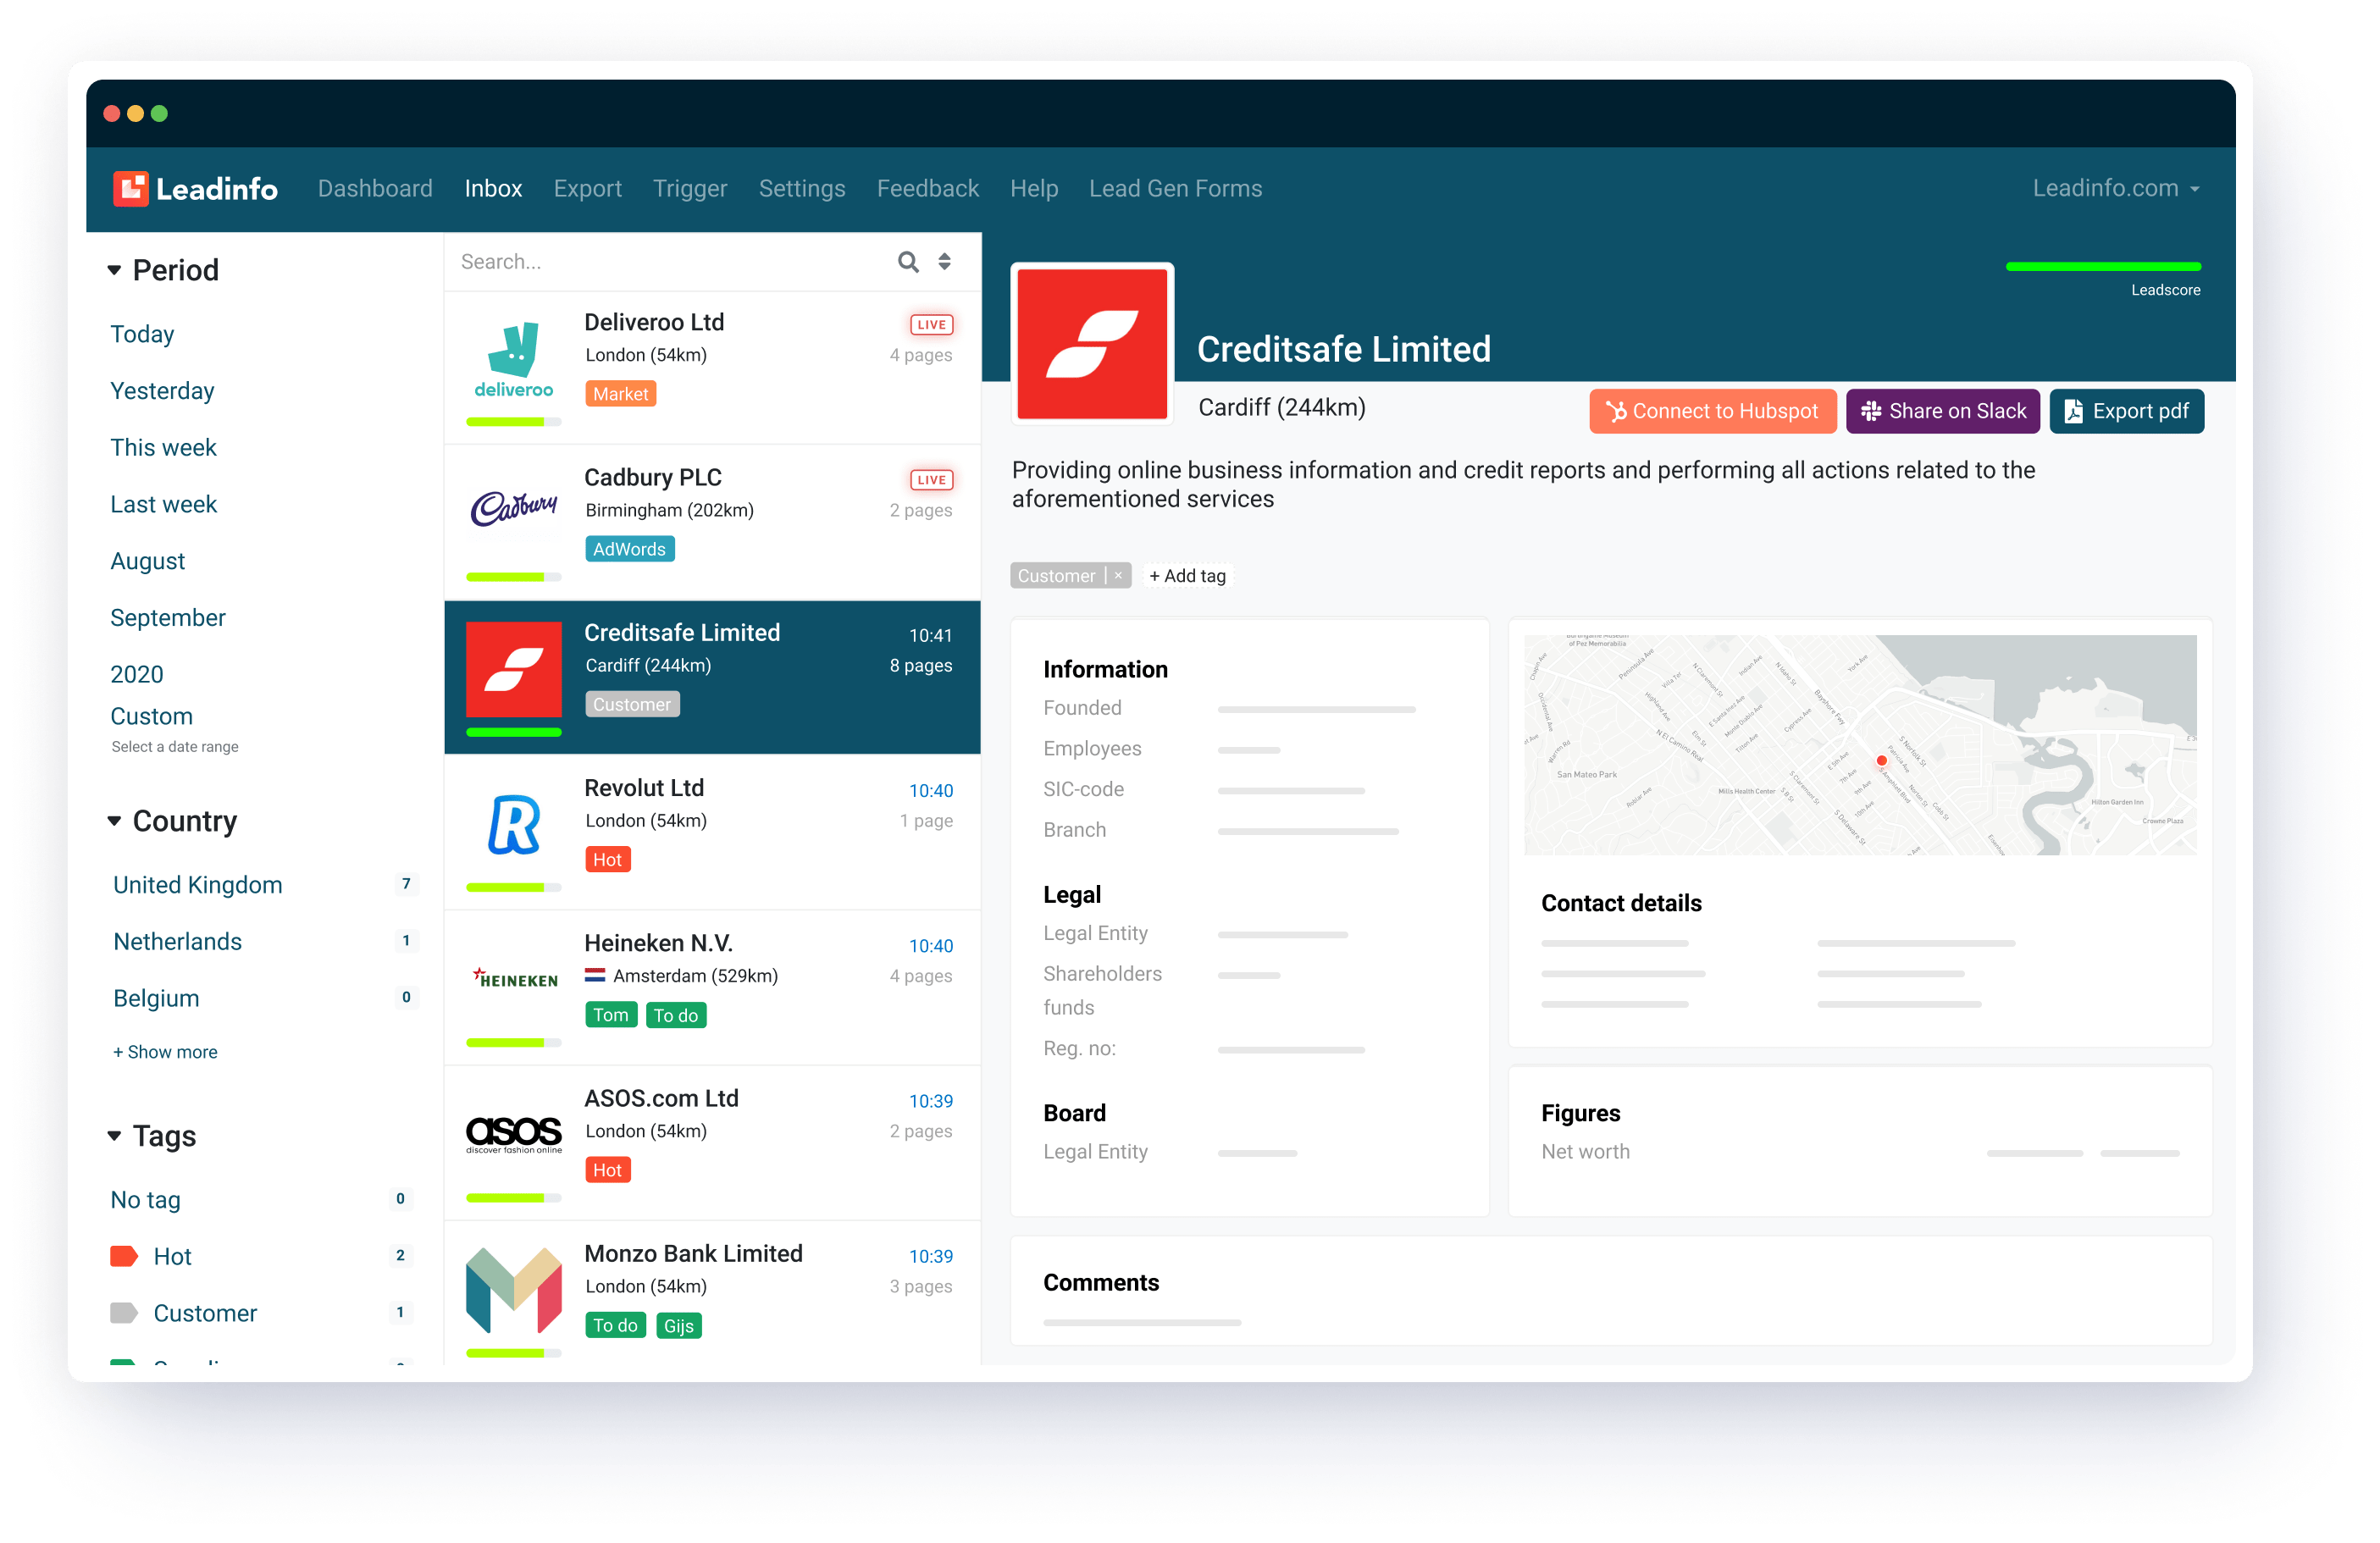 Example of the Leadinfo inbox look and feel